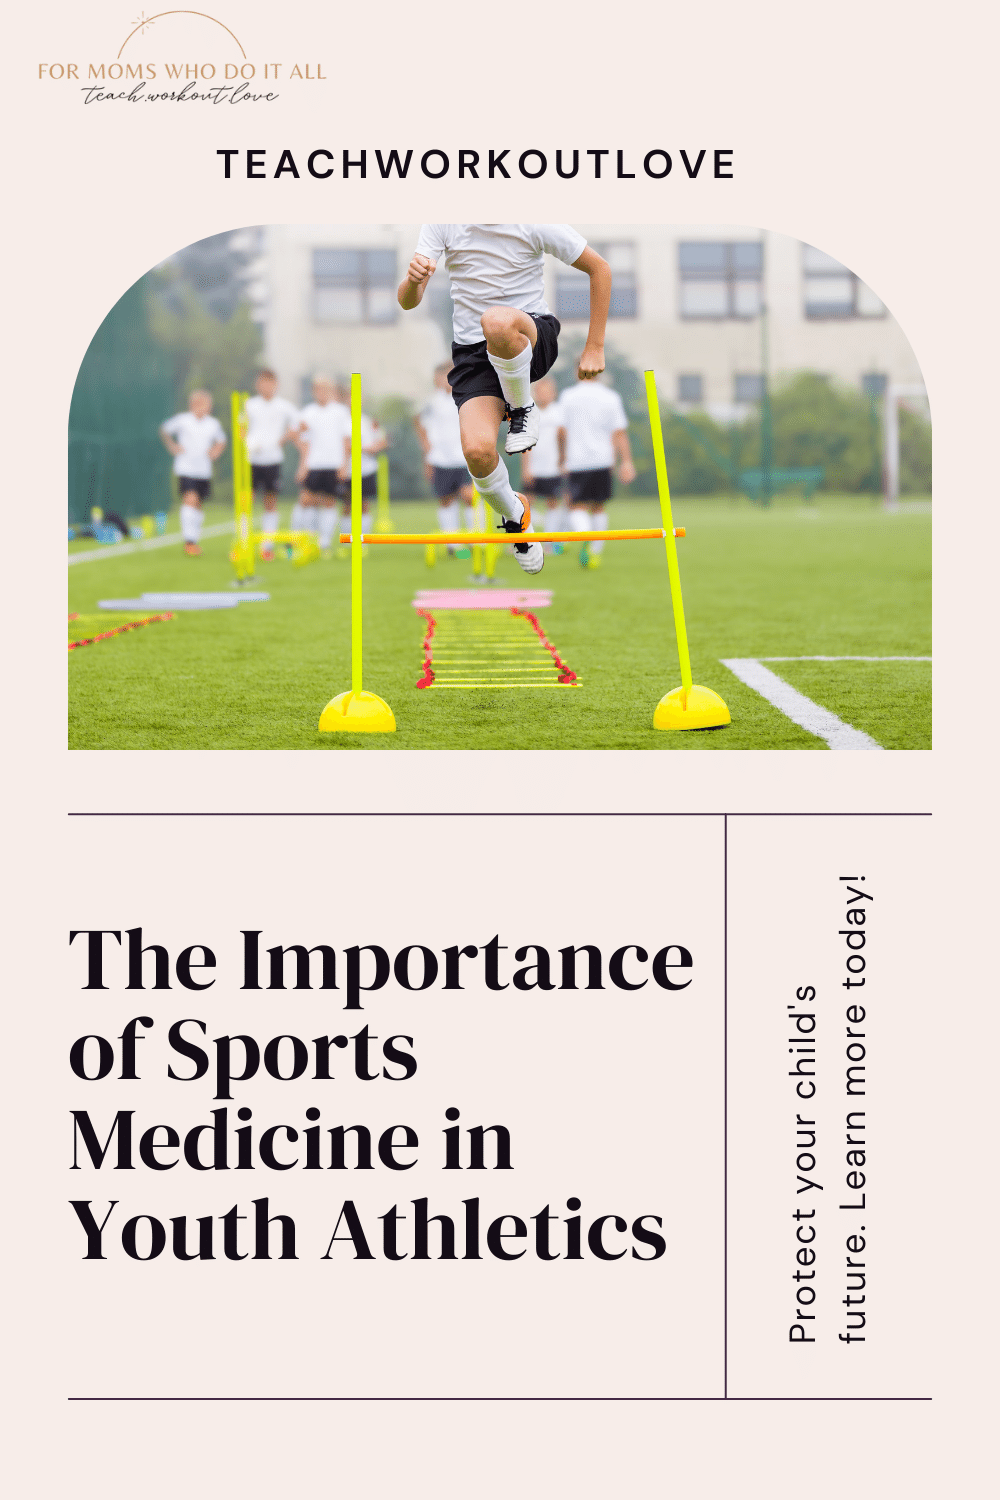 Importance of Sports Medicine in Youth Athletics - teachworktoulove